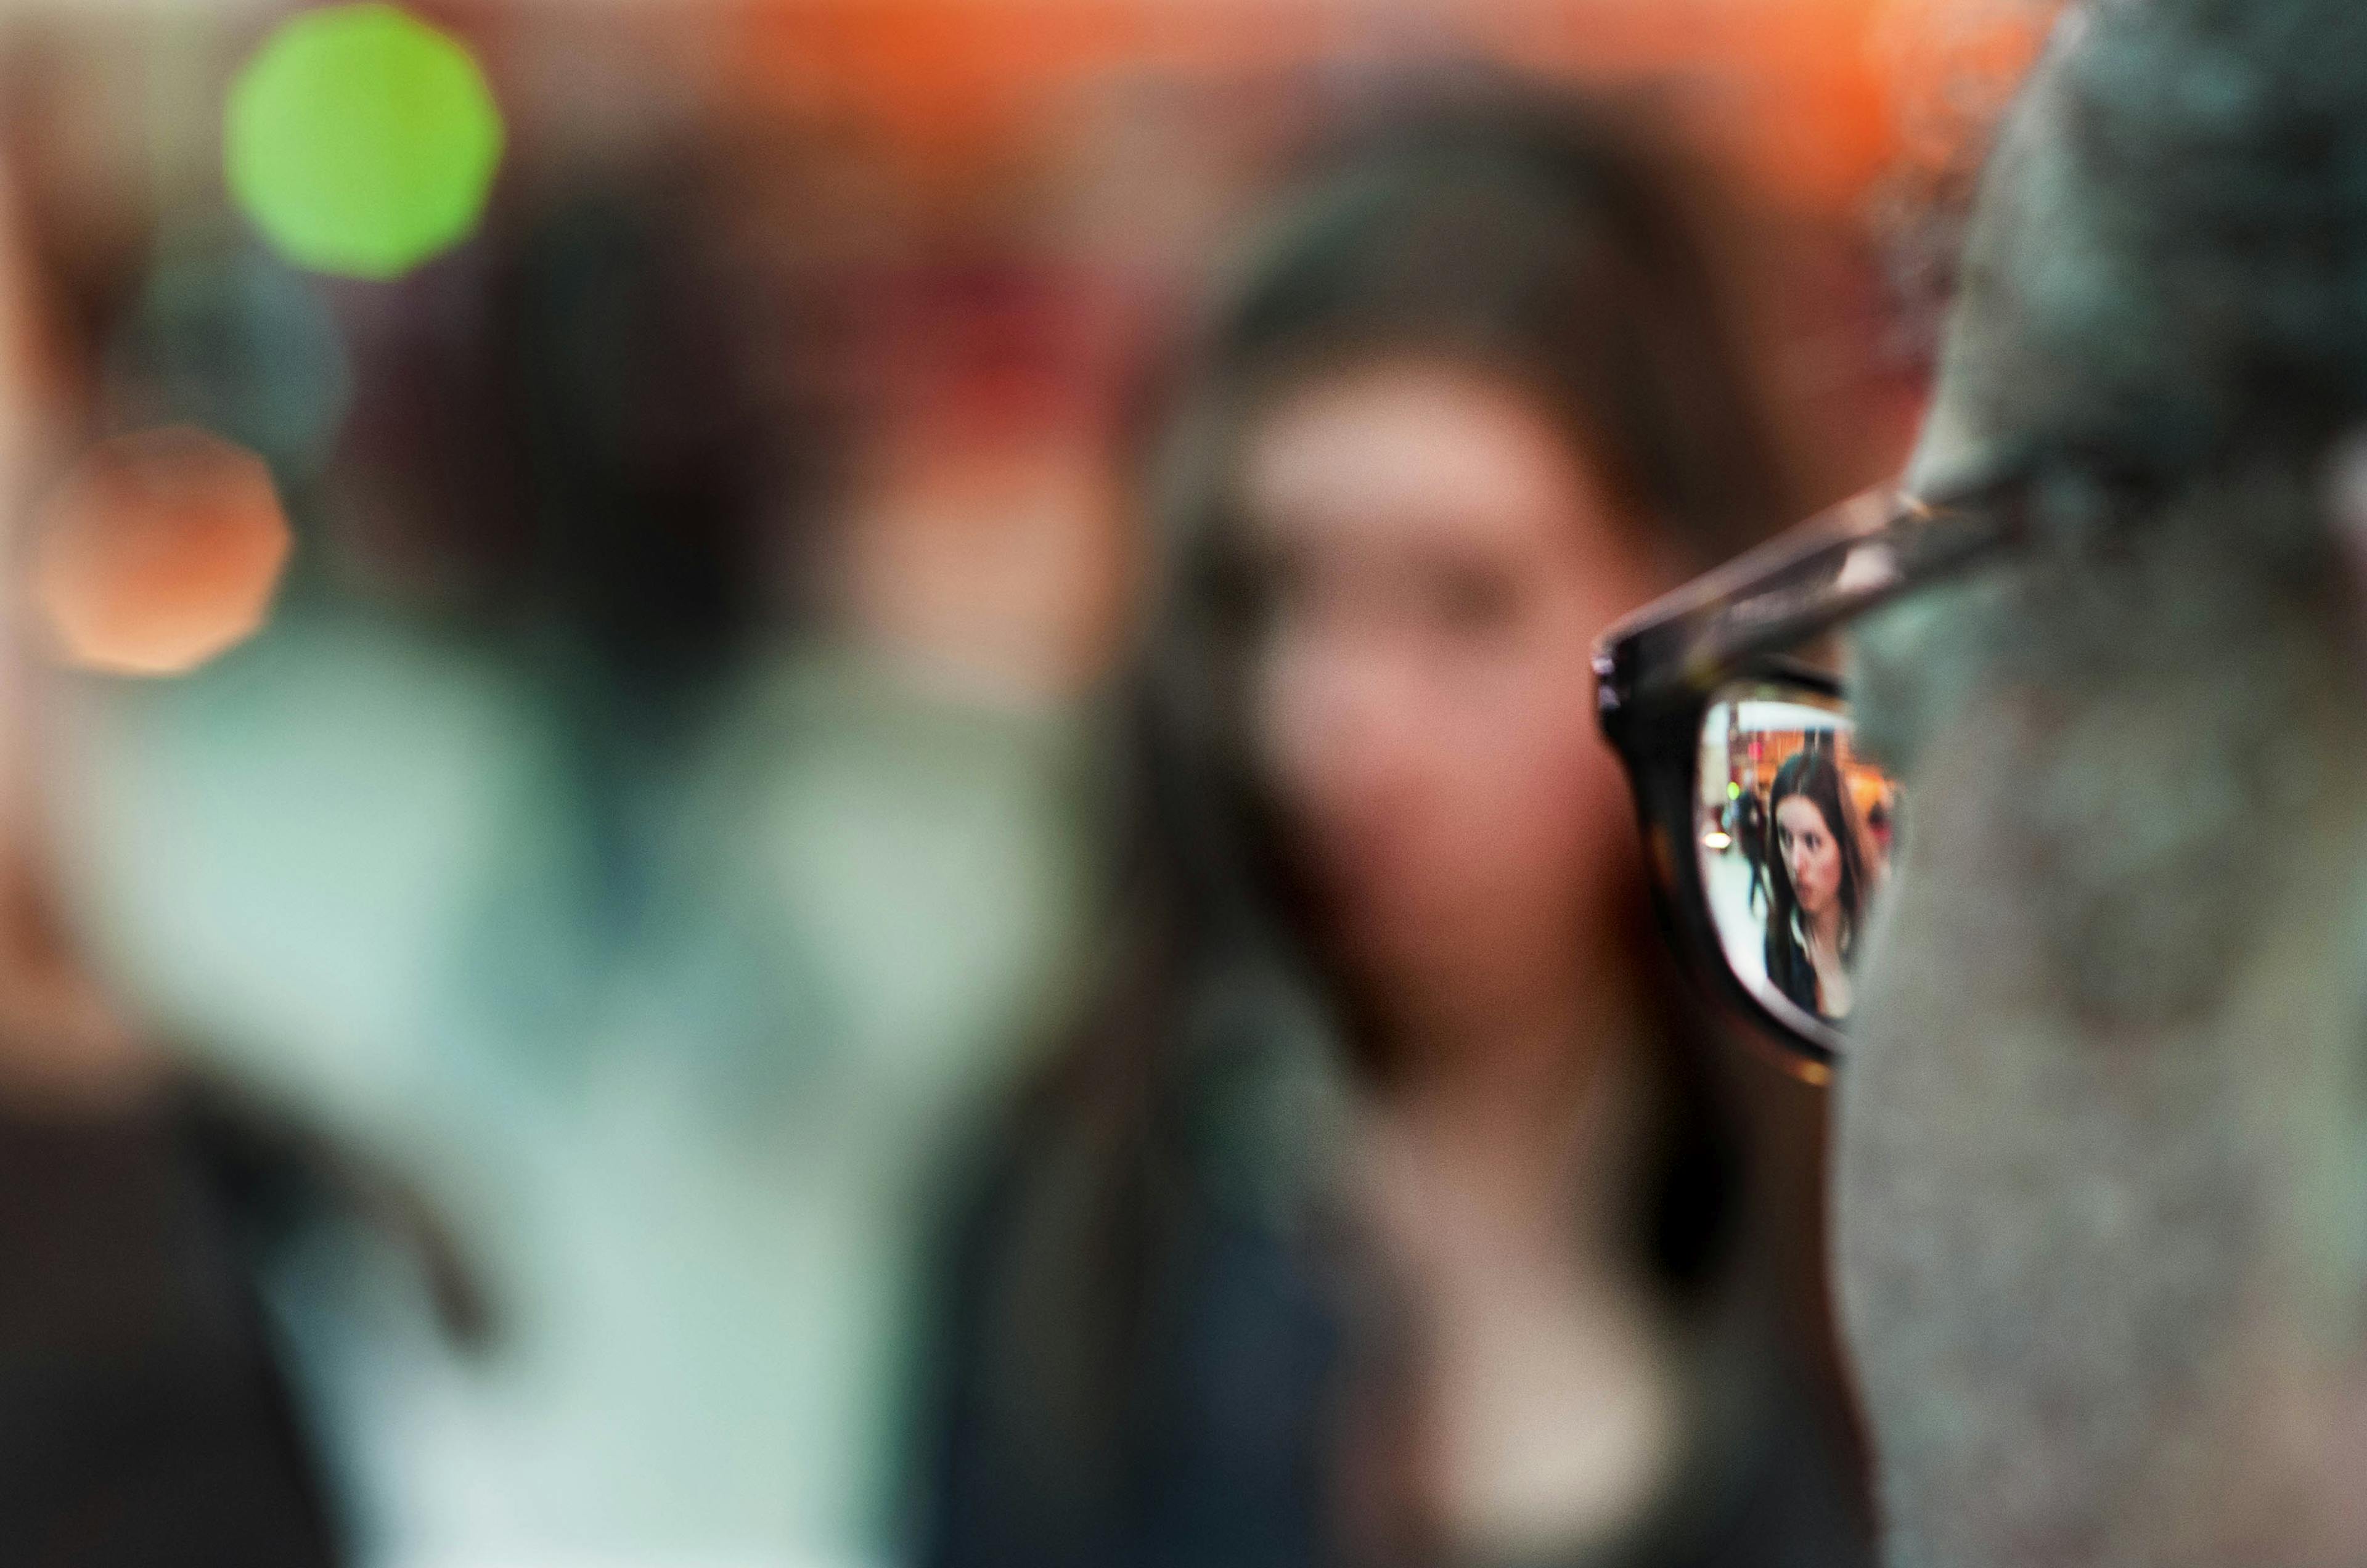 An blurry image focused on the reflection on the glasses worn by a person. 